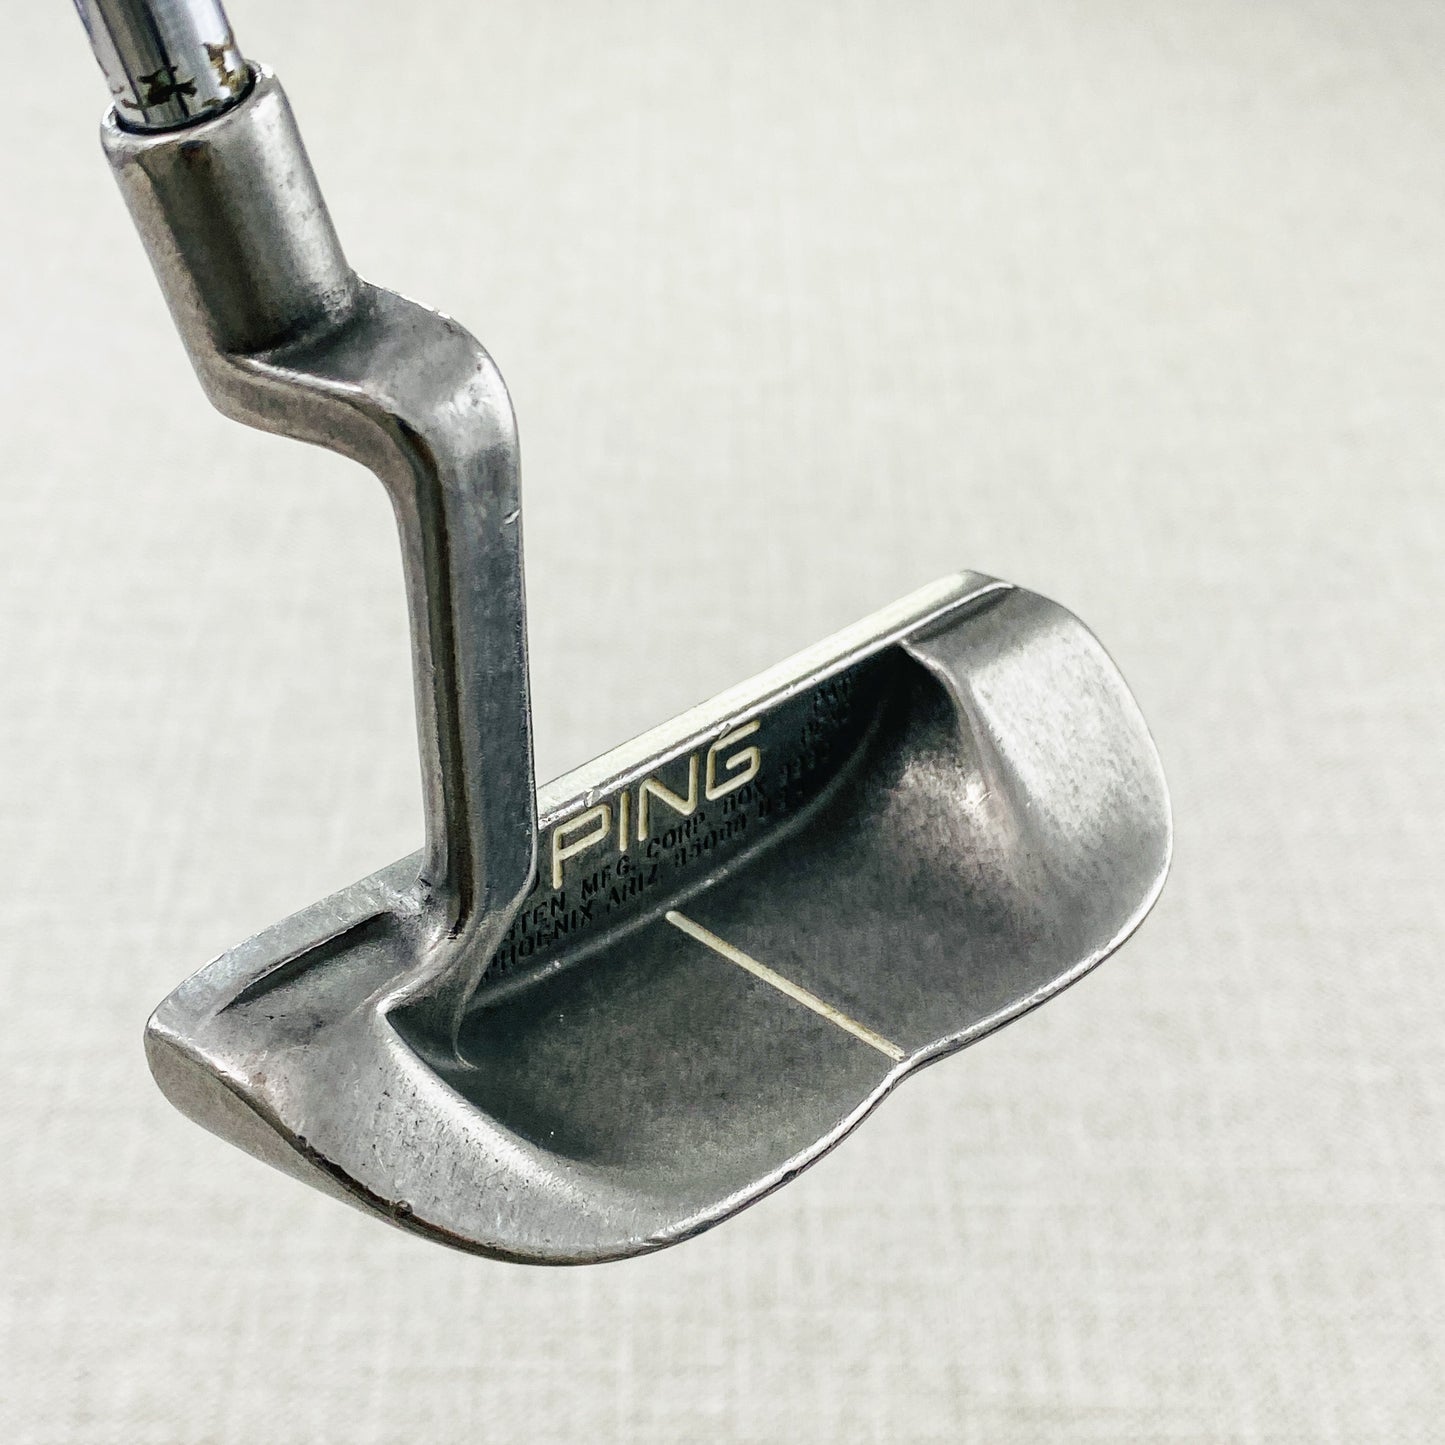 PING B60 Stainless Putter. 32.5 inch - Good Condition # T681